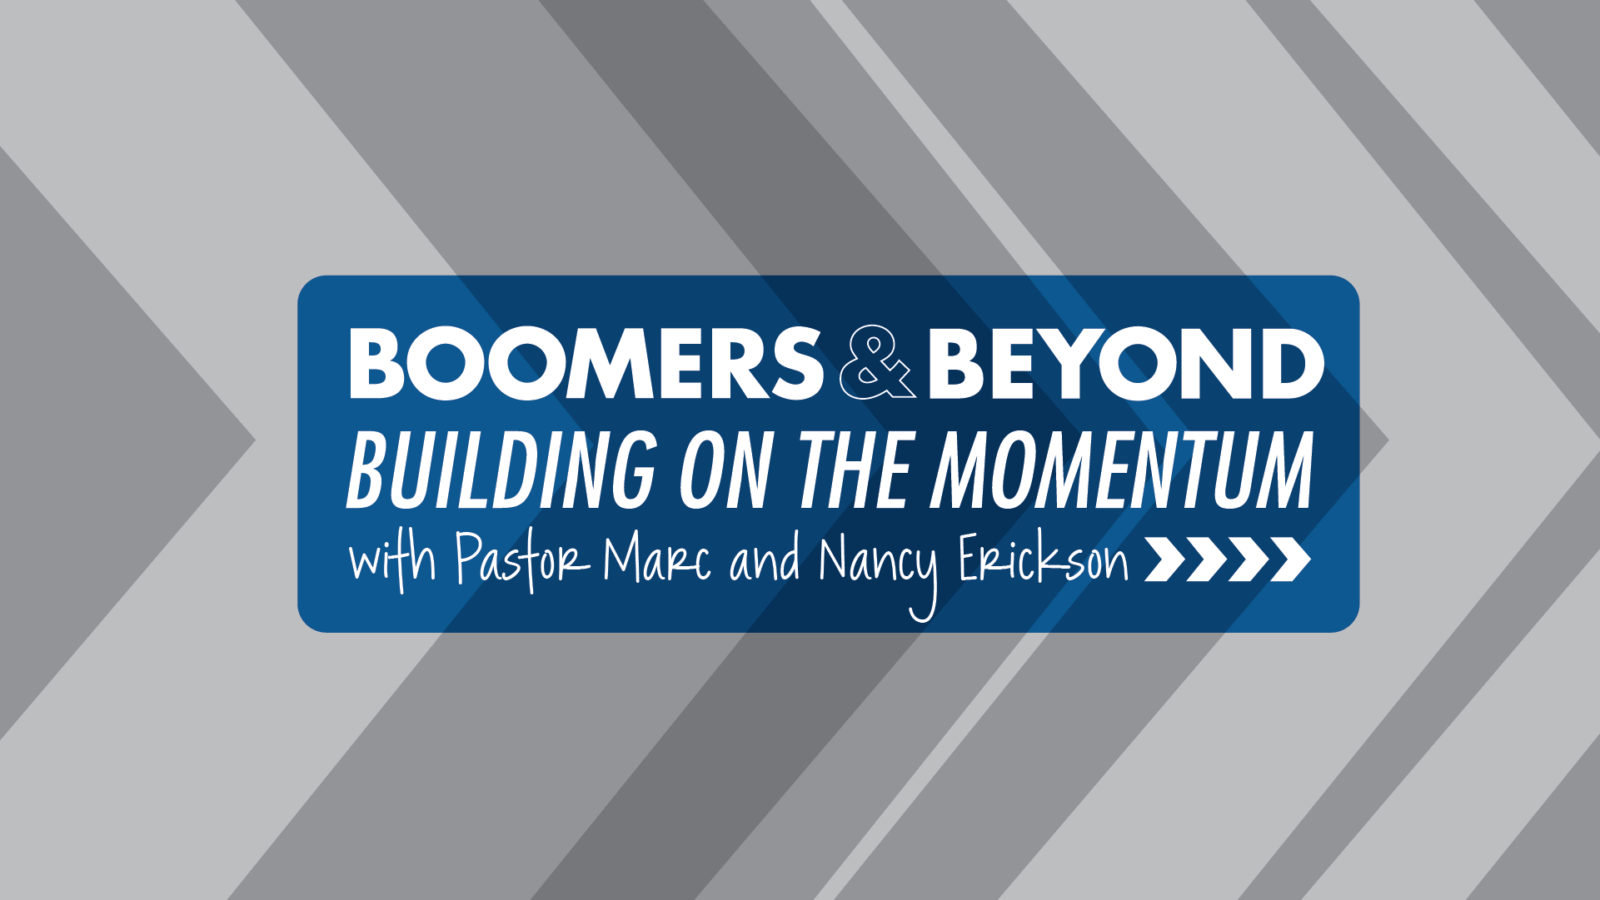 Boomers & Beyond—Building on the Momentum